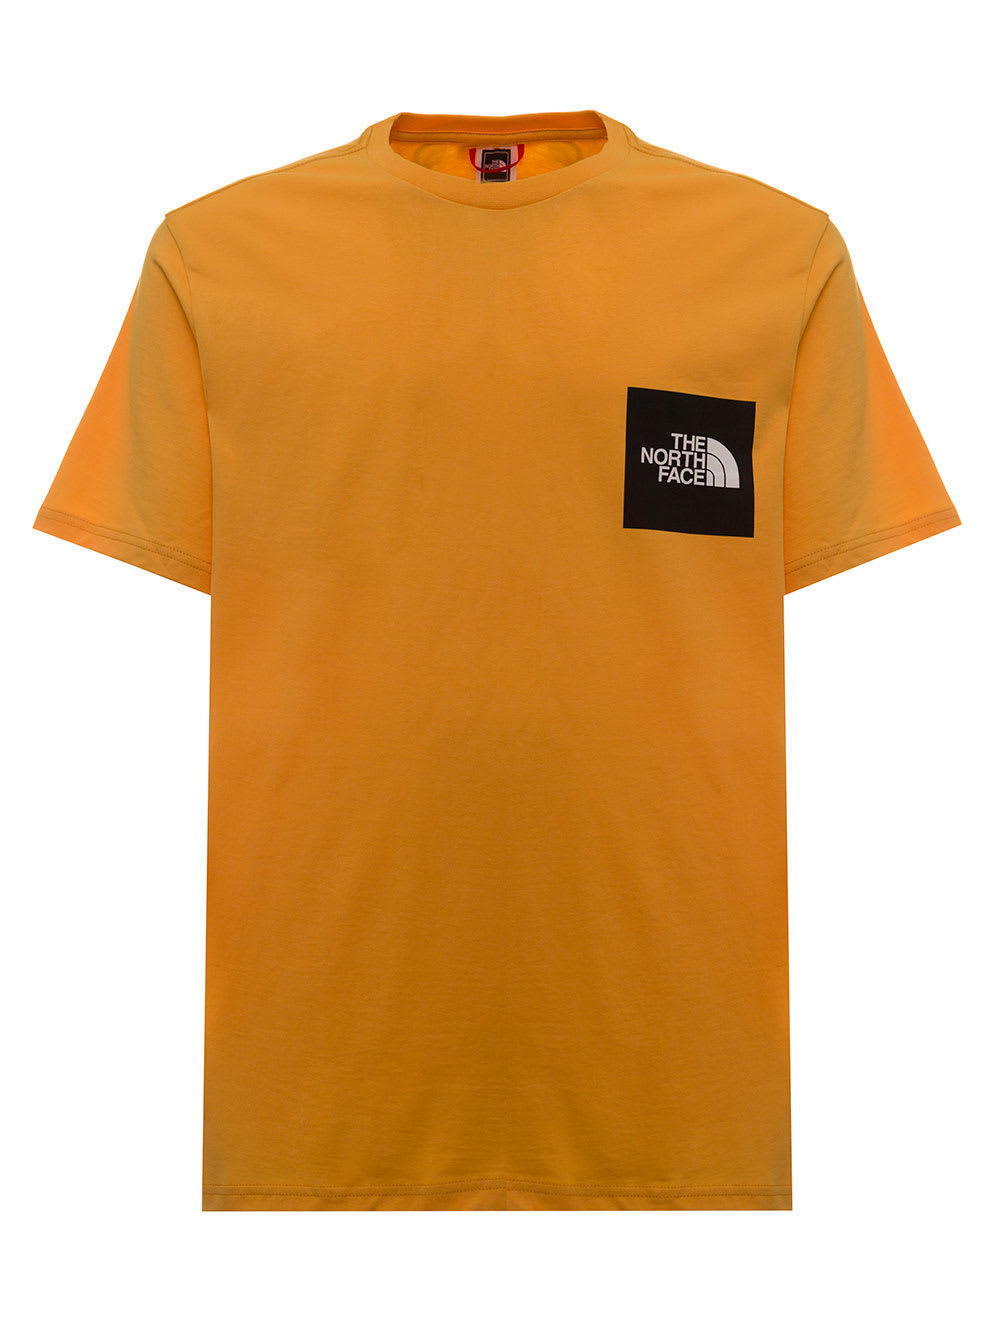 The North Face Mens Orange Jersey T-shirt With Galahm Graphic Print